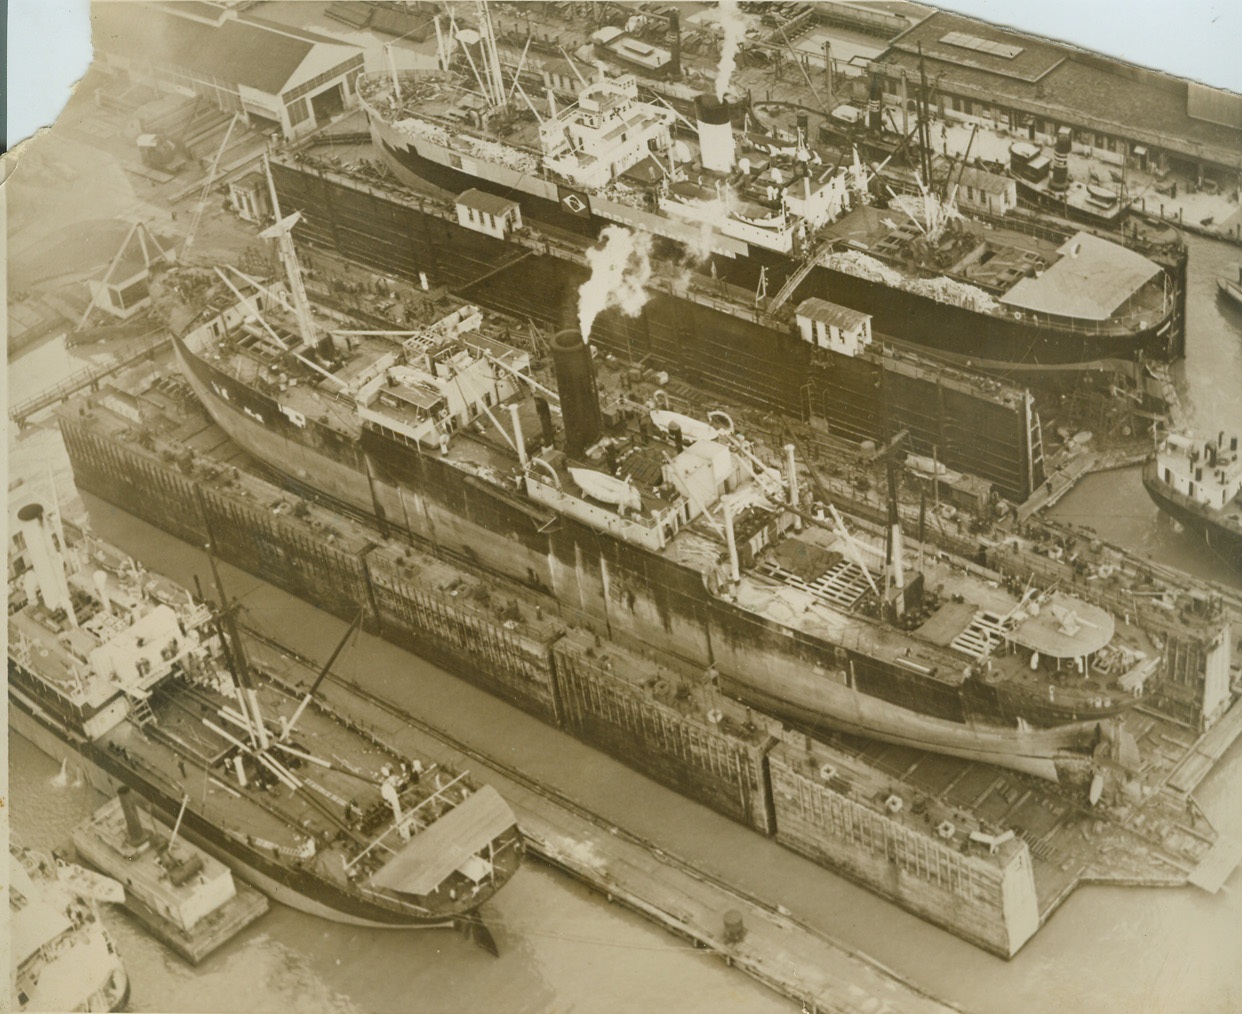 BRITISH SHIPS FITTED WITH ARMOR PLATE IN HOBOKEN, 4/25/1940  HOBOKEN, N.J. – A fine point involving the United States’ neutrality law has been raised with the disclosure that two British merchant ships are being fitted with armor plate in the Hoboken shipyard of the Bethlehem Steel Corp. The ships, one of which may be seen in center of this air photo with gun mounted on after deck, are having steel plates put on pilot houses, bridges and vital parts of the superstructures as protection against air bombs. It will be left to Secretary of State Cordell Hull to decide if this violates U.S. law. Credit: ACME;